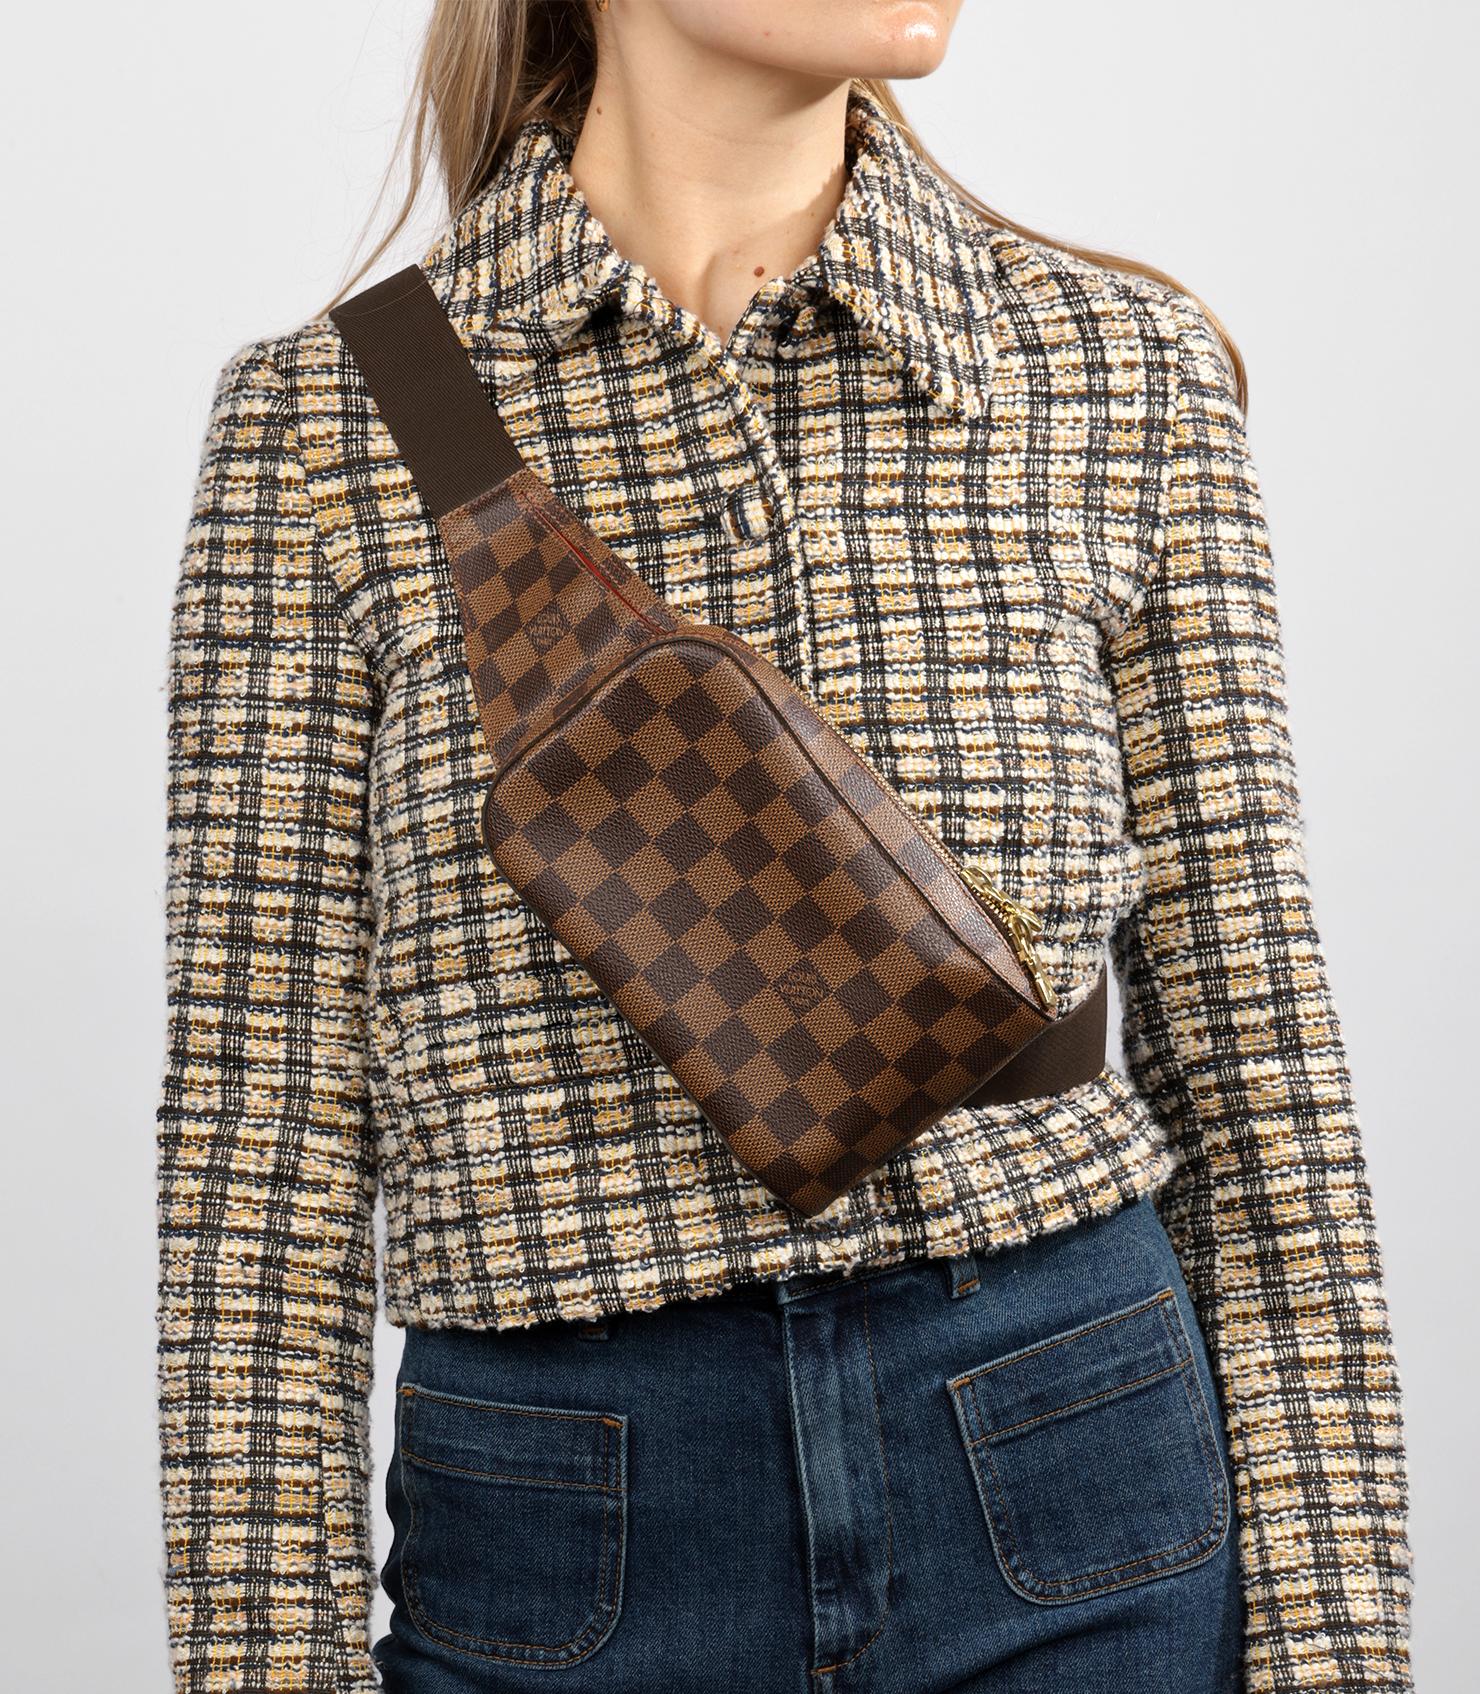 Louis Vuitton Damier Ebene Coated Canvas Vintage Geronimos

Brand- Louis Vuitton
Model- Geronimos
Product Type- Crossbody
Serial Number- CA****
Age- Circa 2003
Colour- Brown
Hardware- Gold
Material(s)- Coated Canvas
Authenticity Details- Date